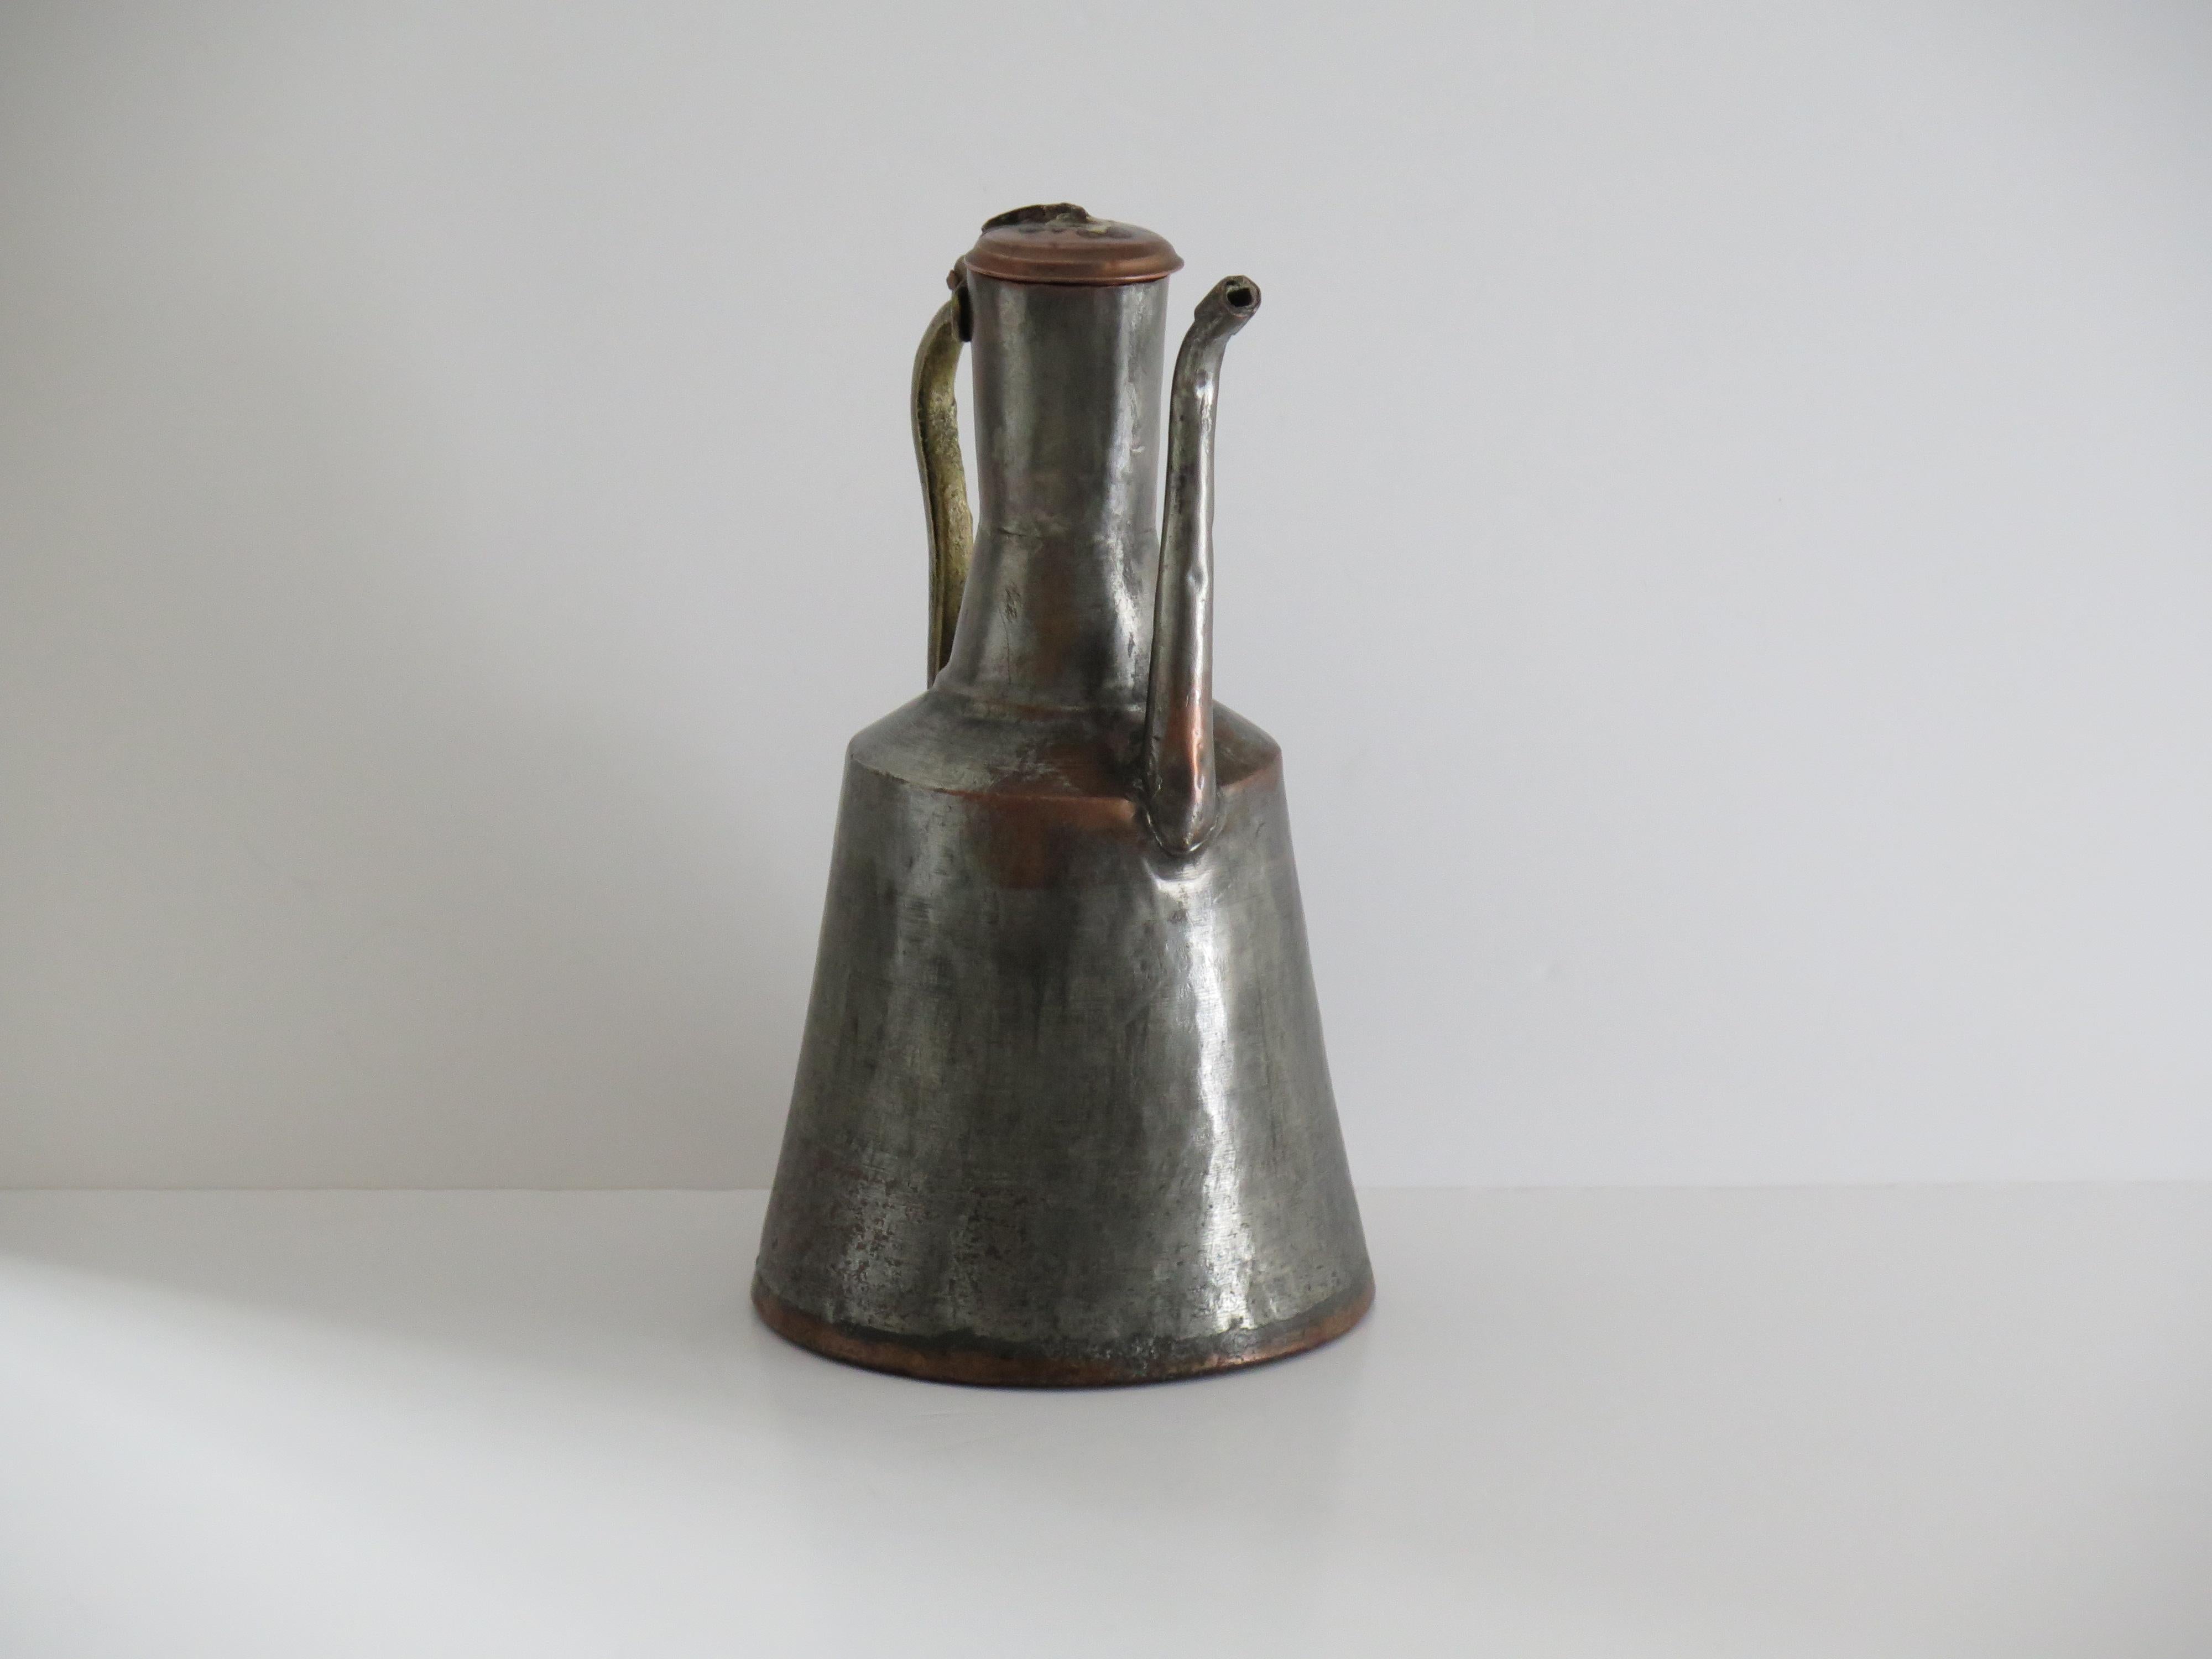 Islamic Ewer or Pitcher tinned Copper Turkish / Middle Eastern, Early 19th Century For Sale